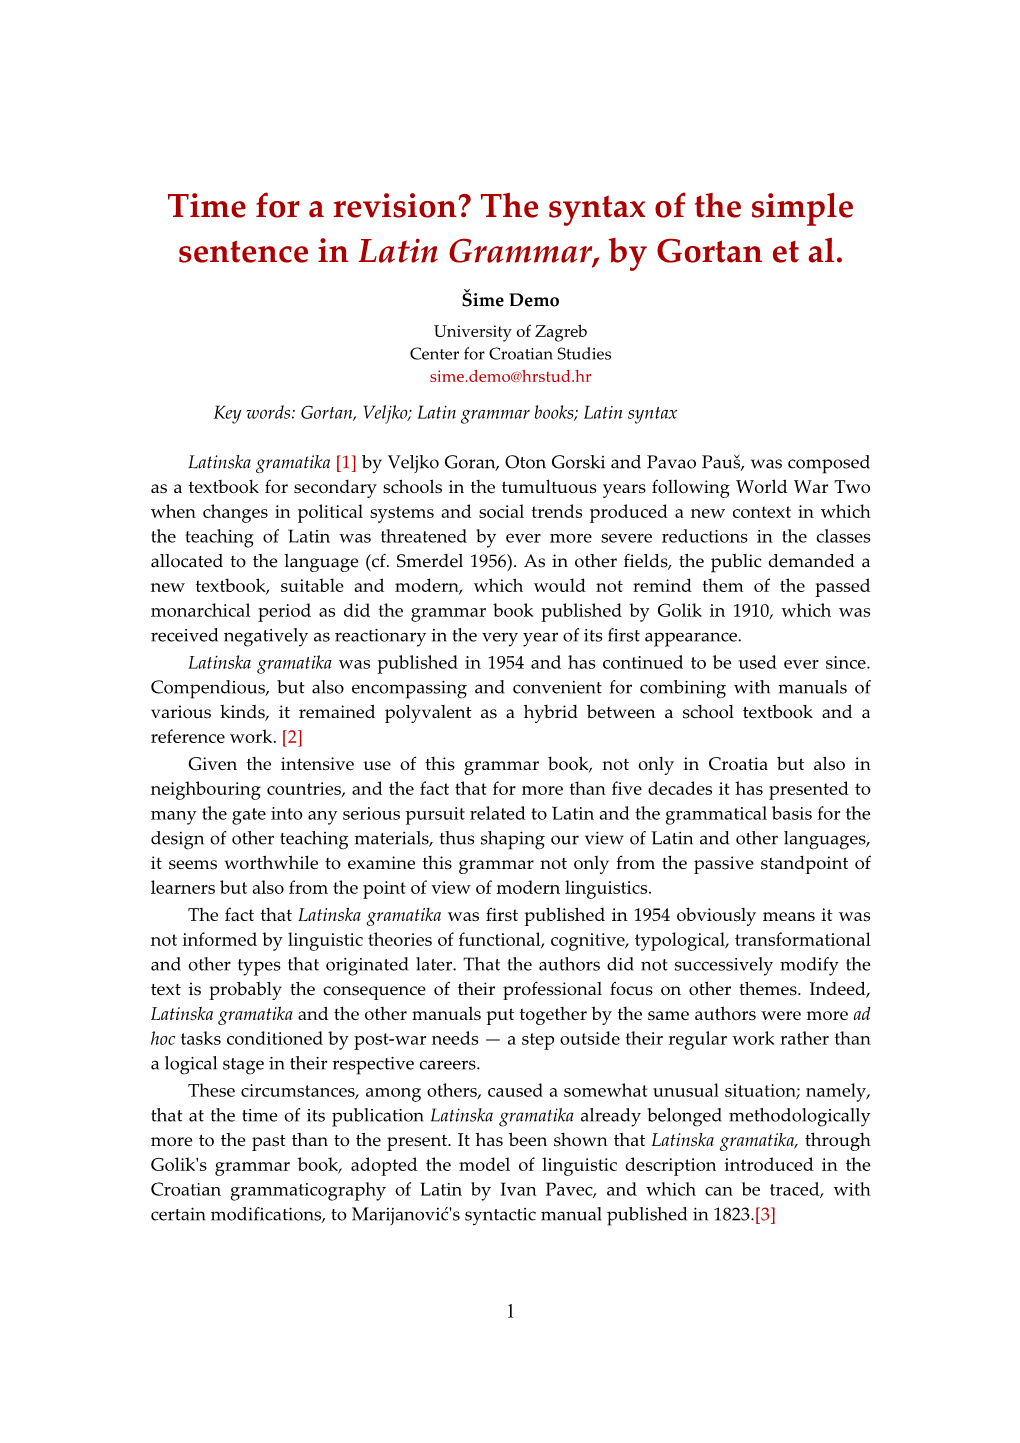 The Syntax of the Simple Sentence in Latin Grammar, by Gortan Et Al